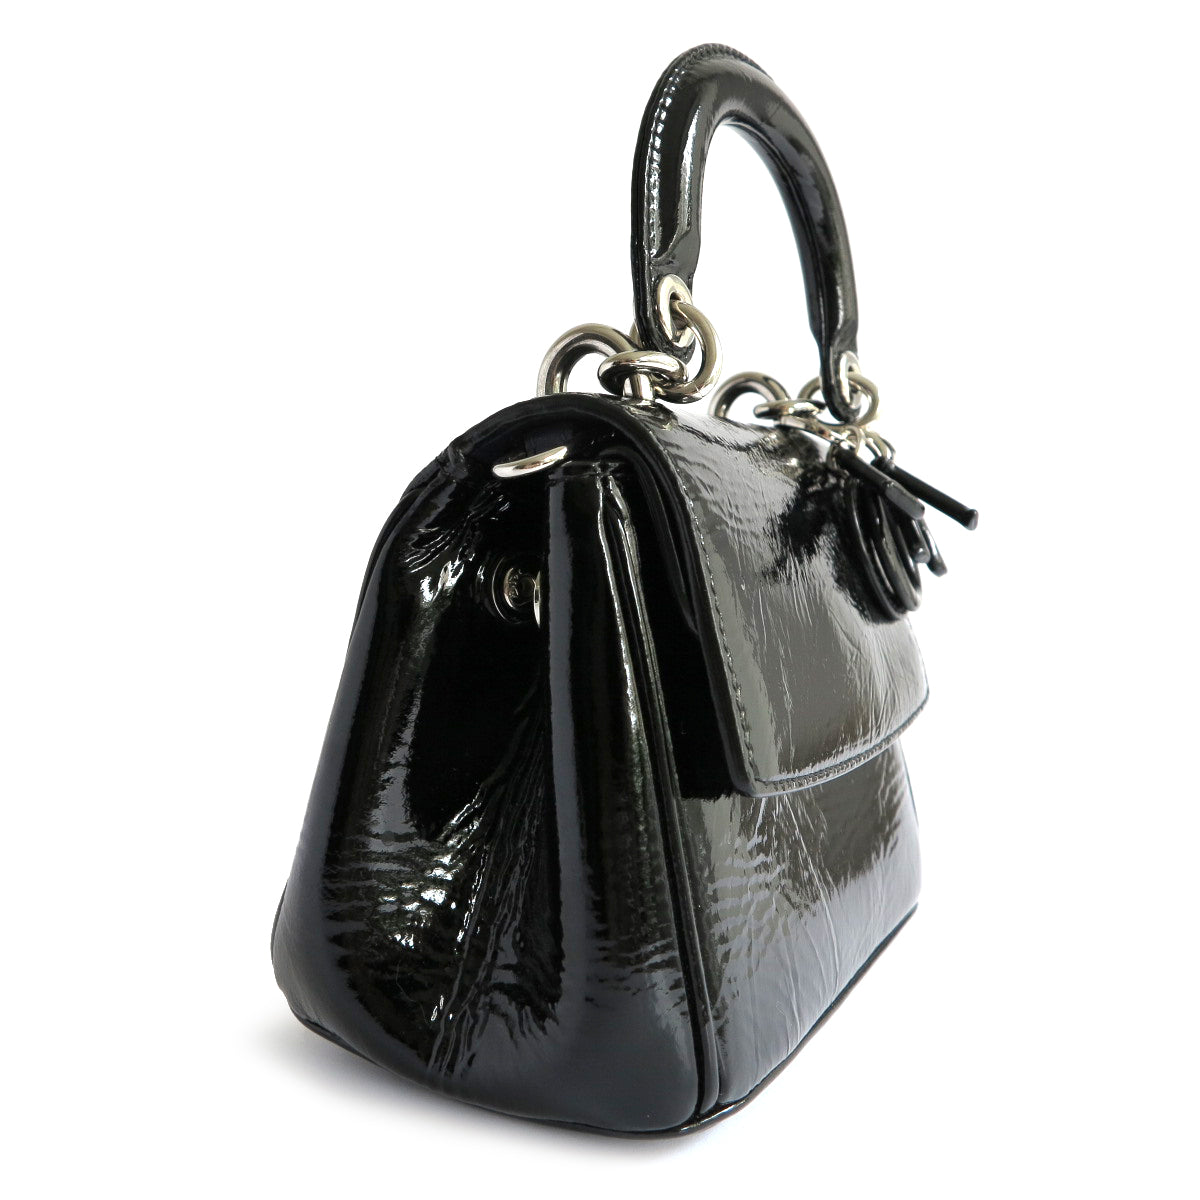 Micro Be Dior Bag in Black Patent Leather